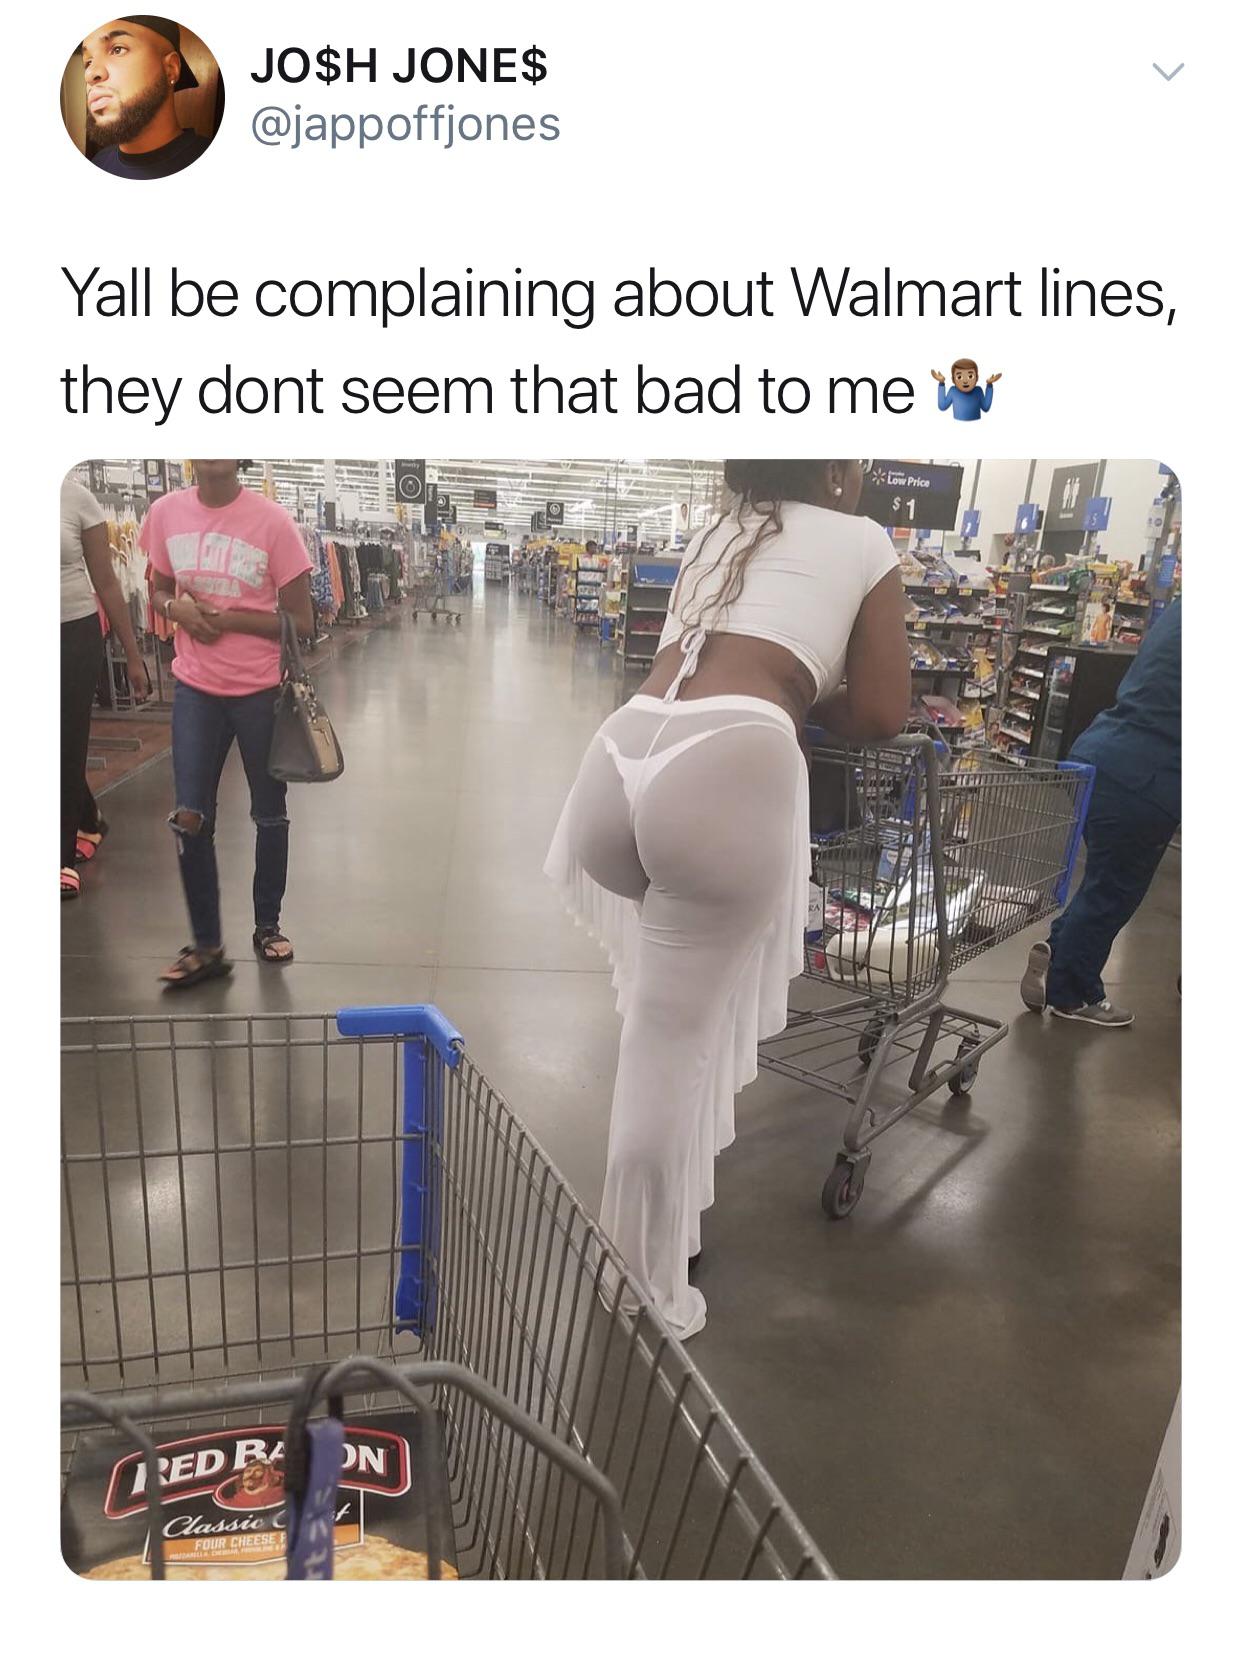 Josh Jones Yall be complaining about Walmart lines, they dont seem that bad...